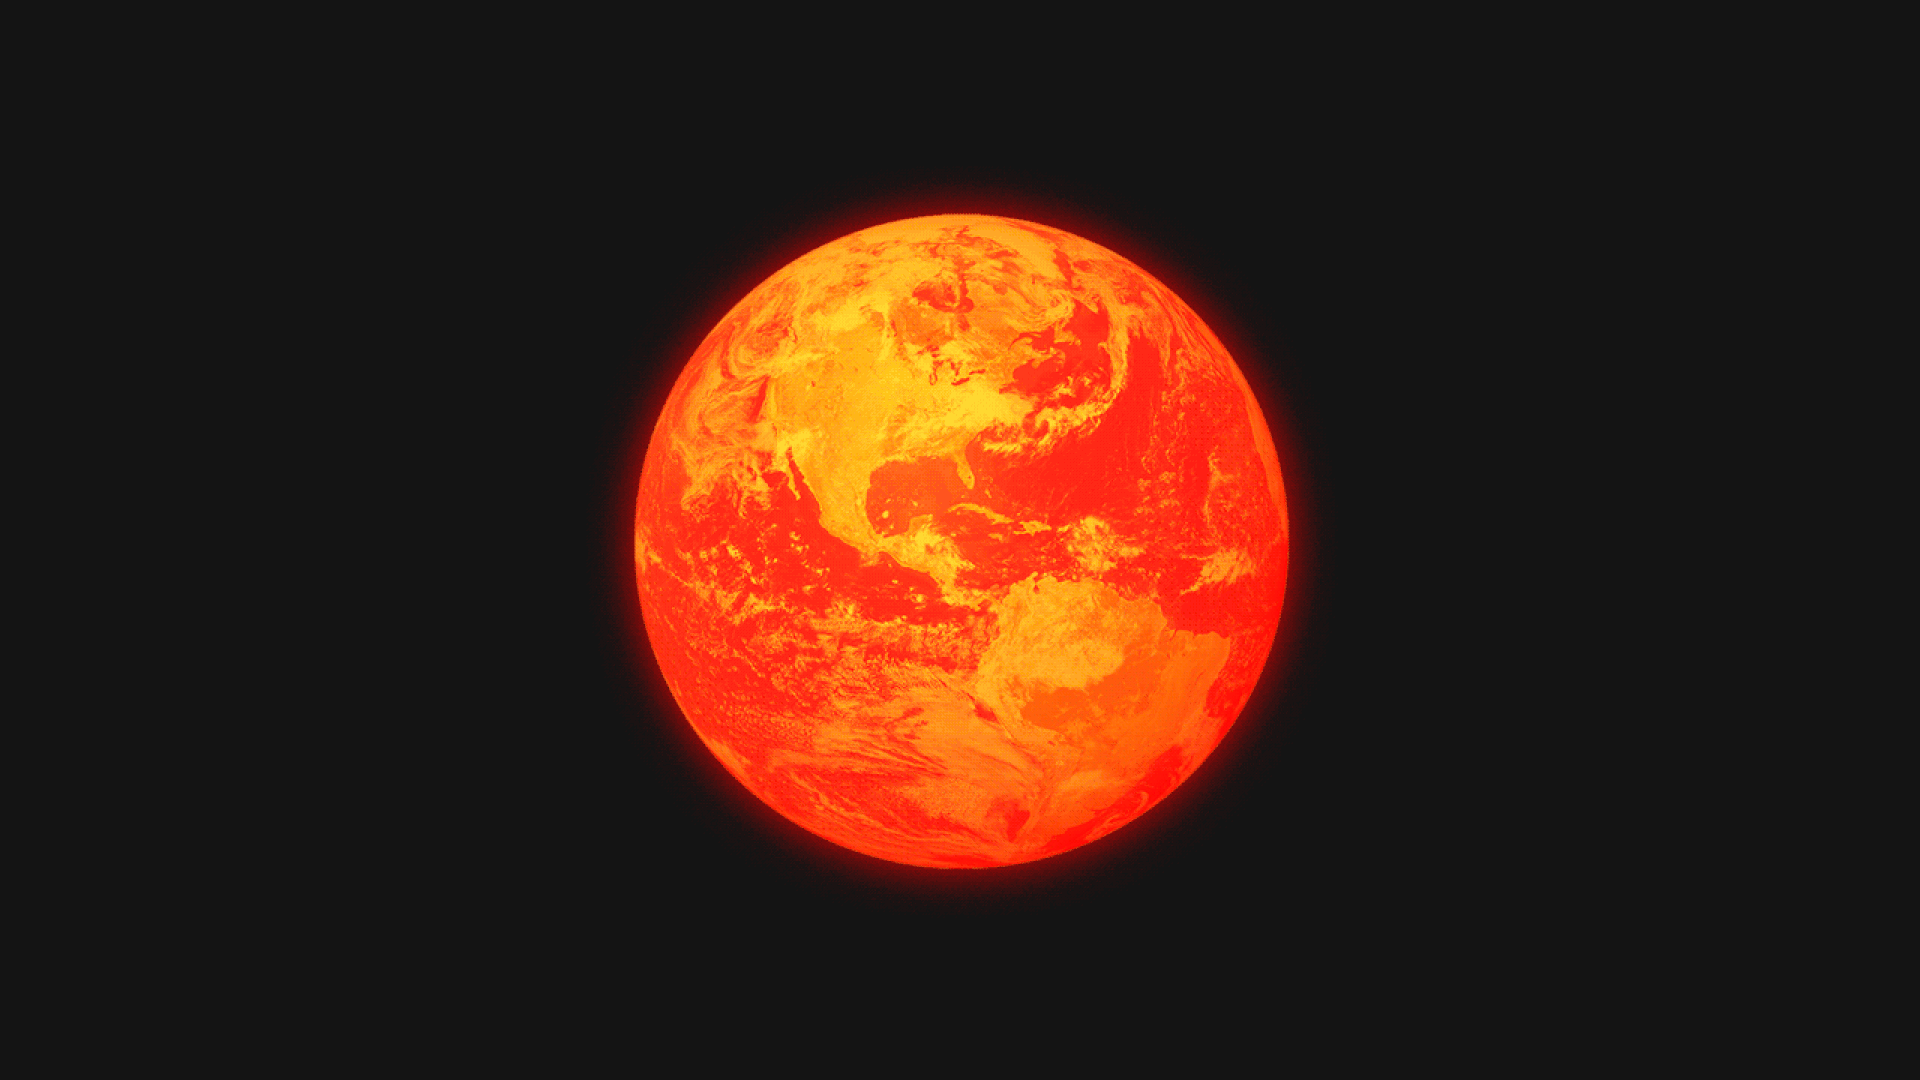 Illustration of the earth flashing red like a siren